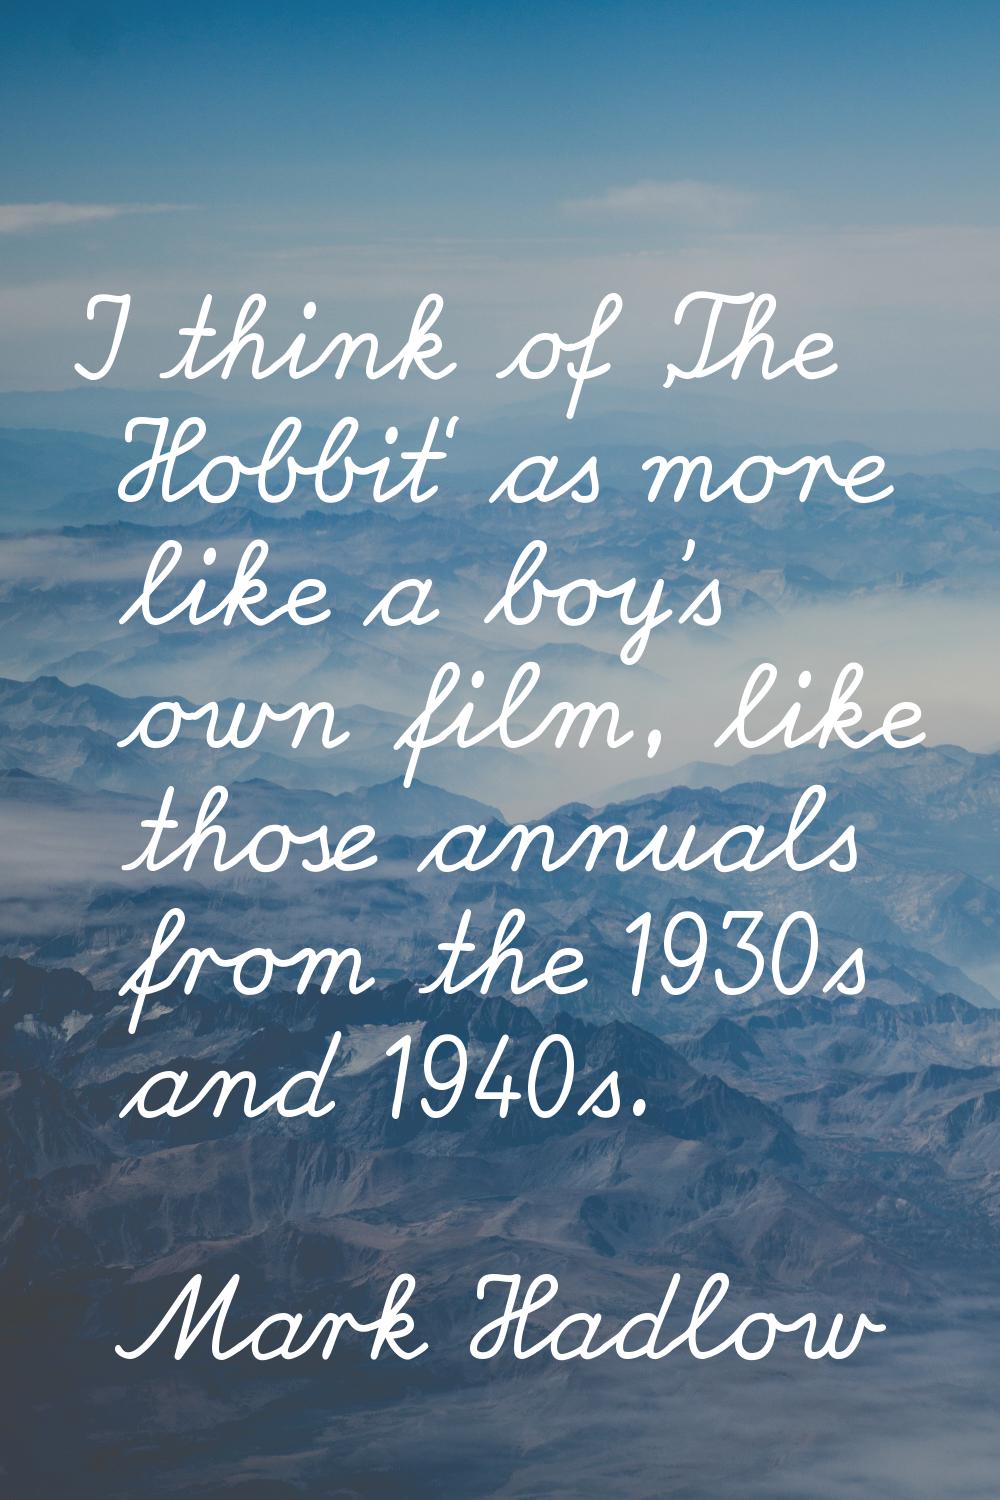 I think of 'The Hobbit' as more like a boy's own film, like those annuals from the 1930s and 1940s.